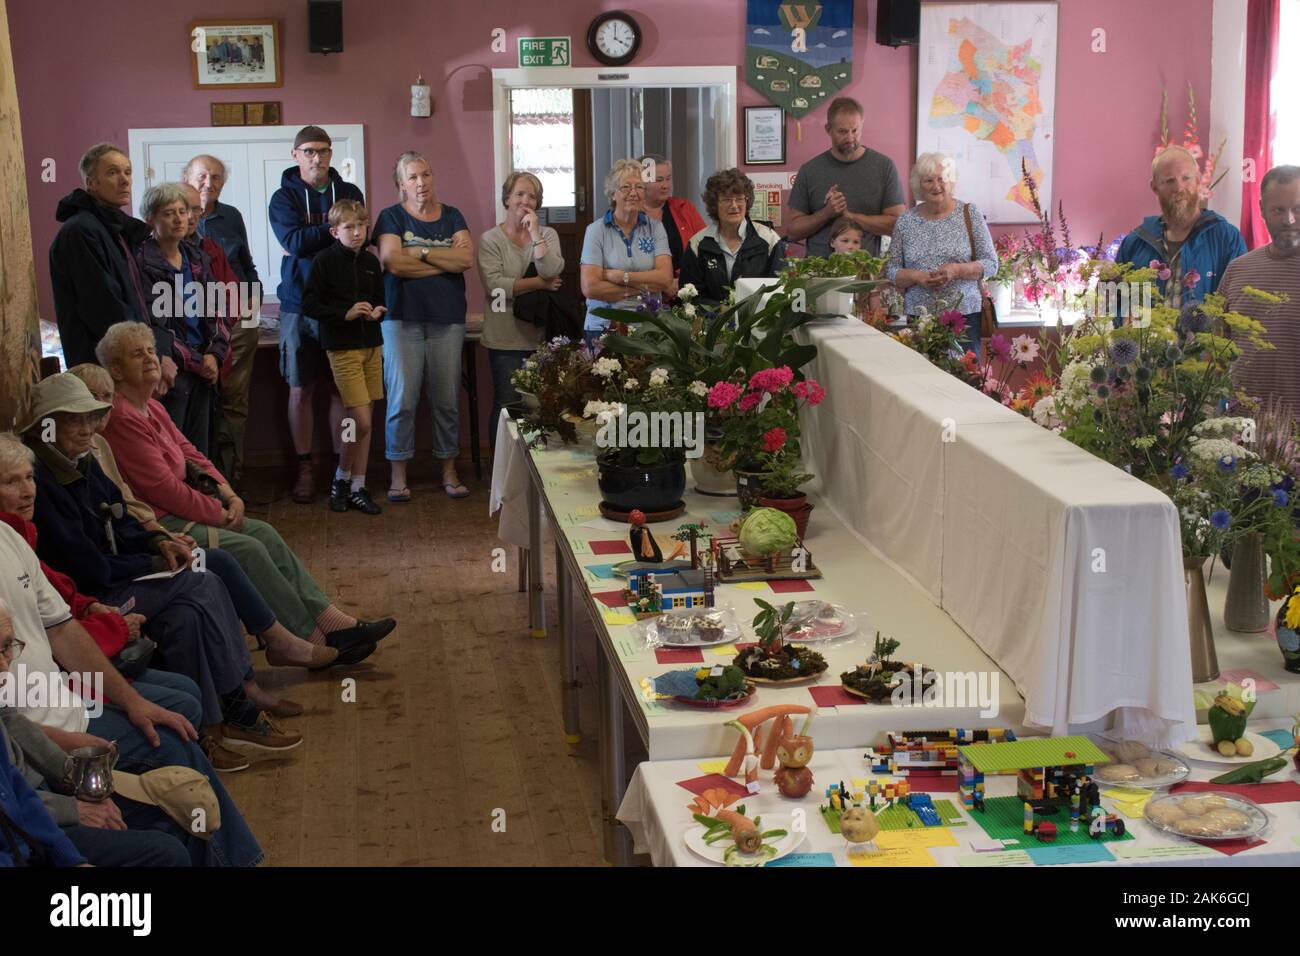 Annual Village Show UK. Community event flowers and home grown produce, vegetables, childrens make animals and funny faces made from vegetables. All displayed in the village hall. Brompton Ralph, Somerset. People tturn out of the view of the judges. 2010s 2019 HOMER SYKES Stock Photo